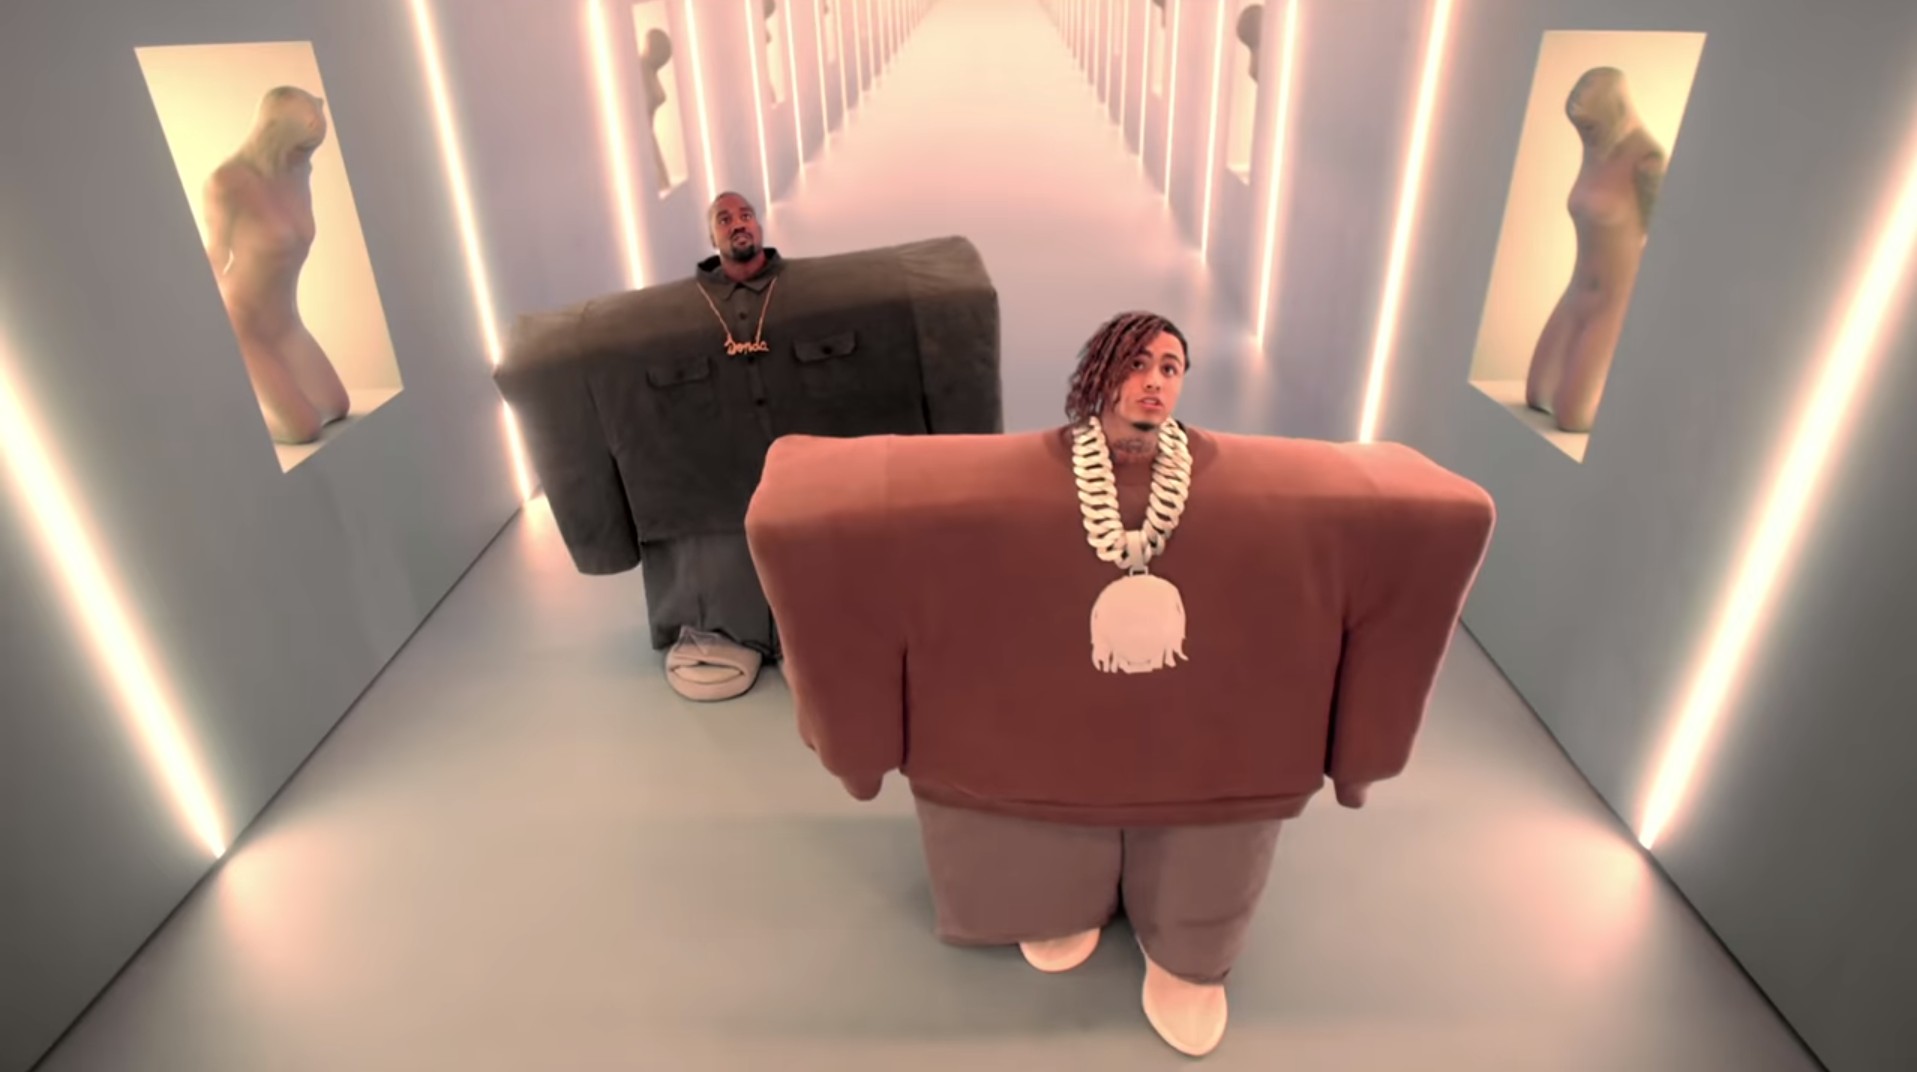 Roblox Off Wii